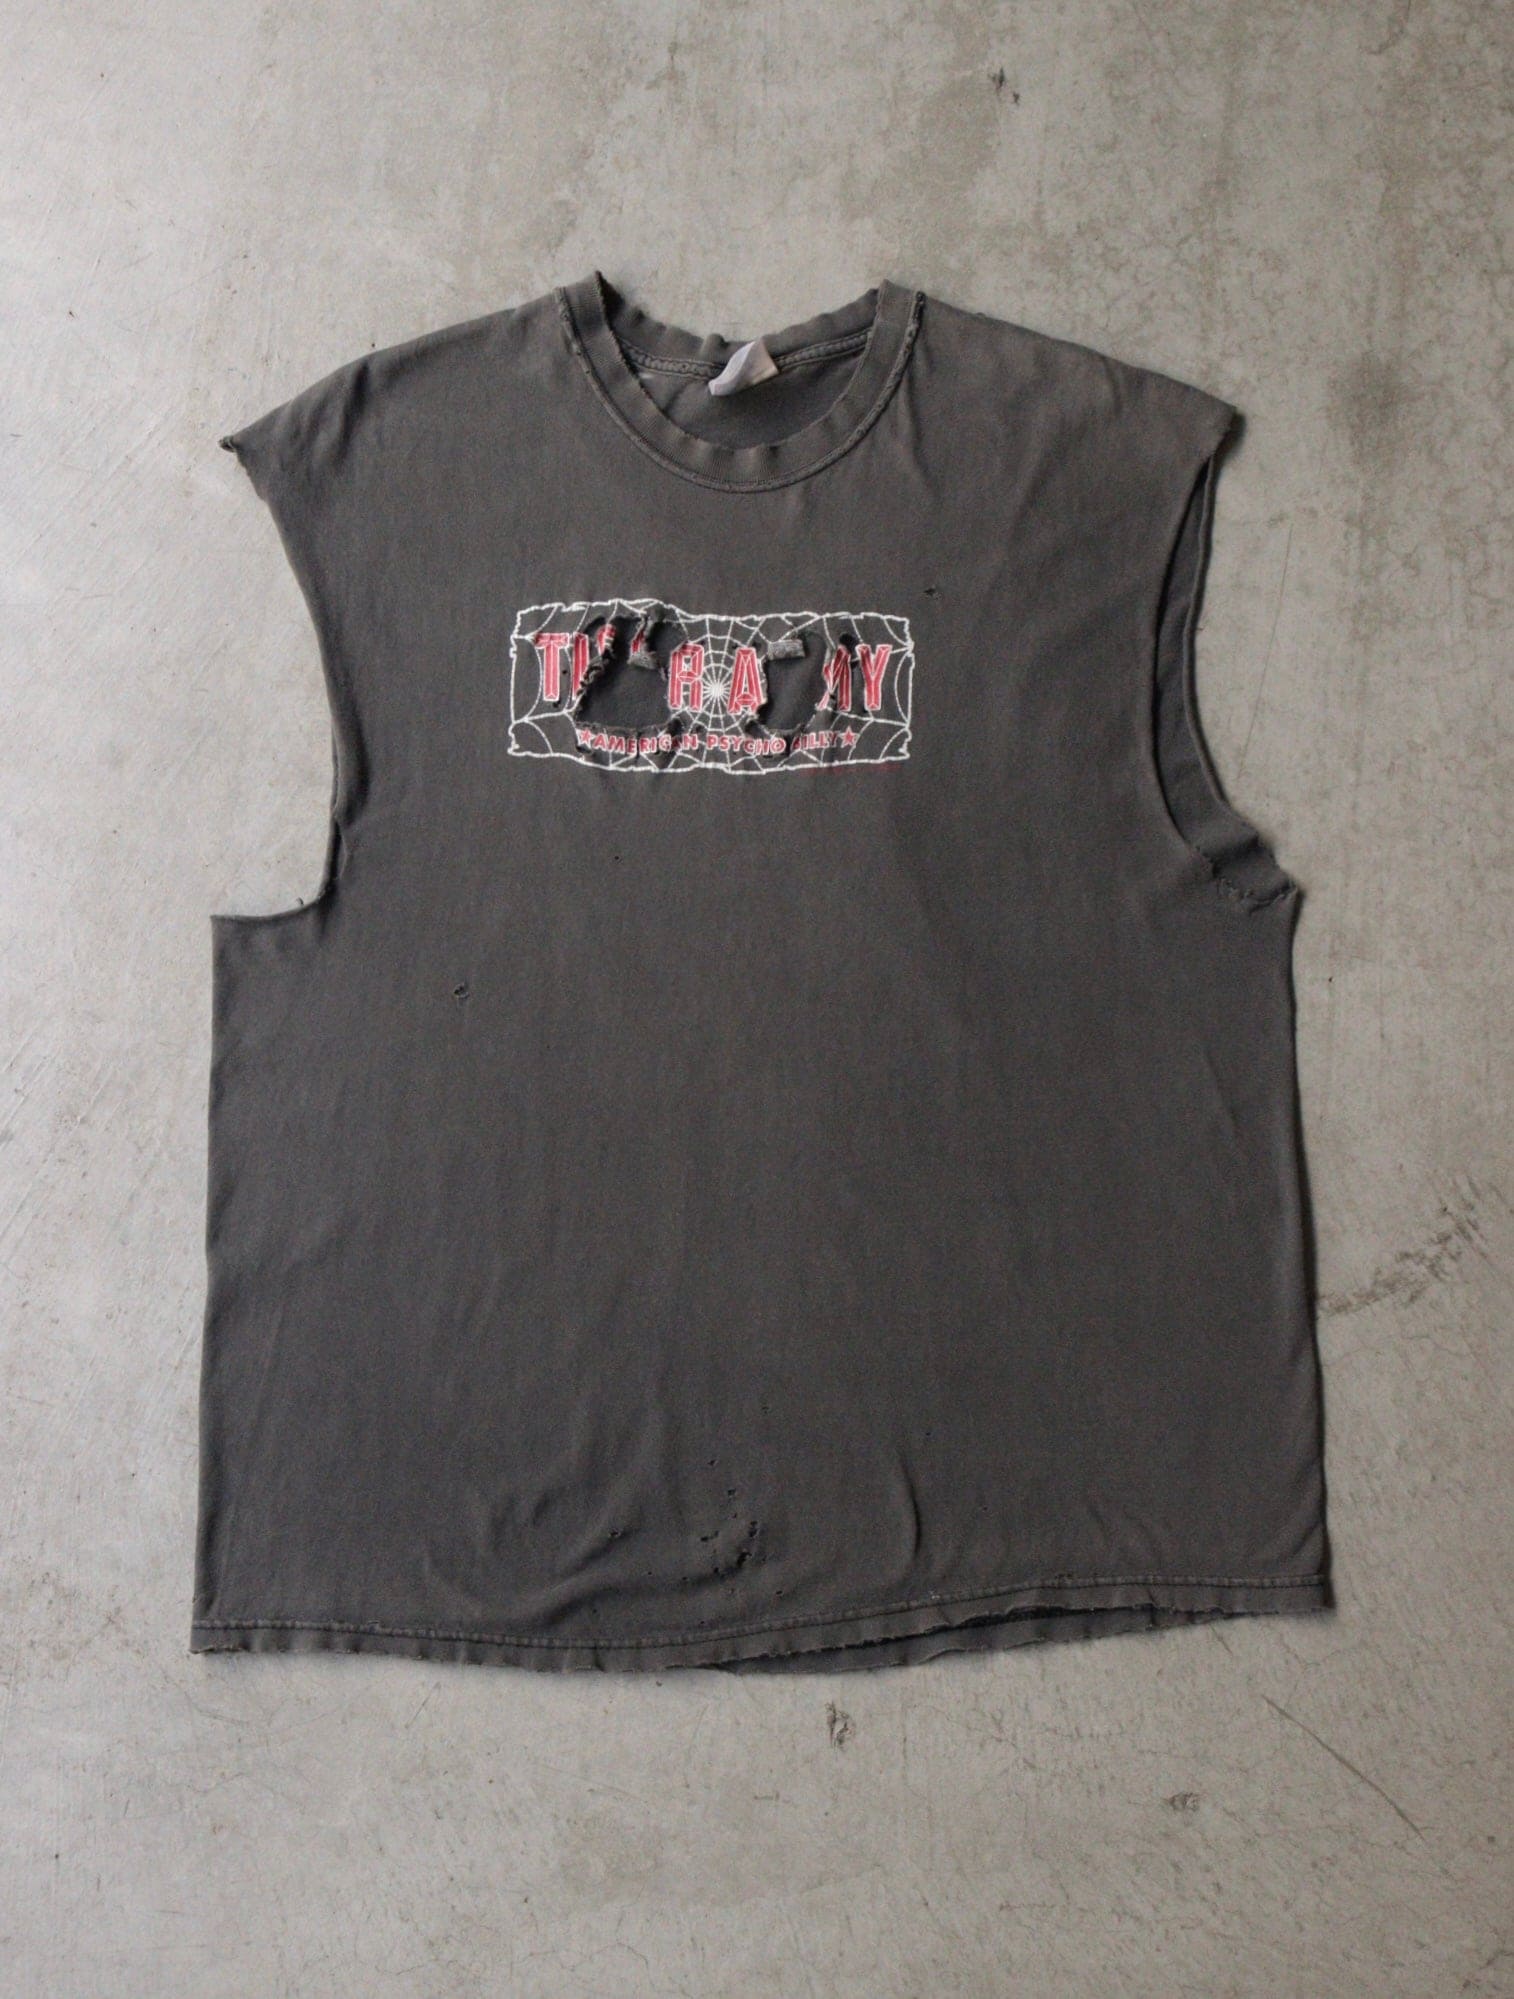 2000S THRASHED & FADED TIGER ARMY BAND TEE